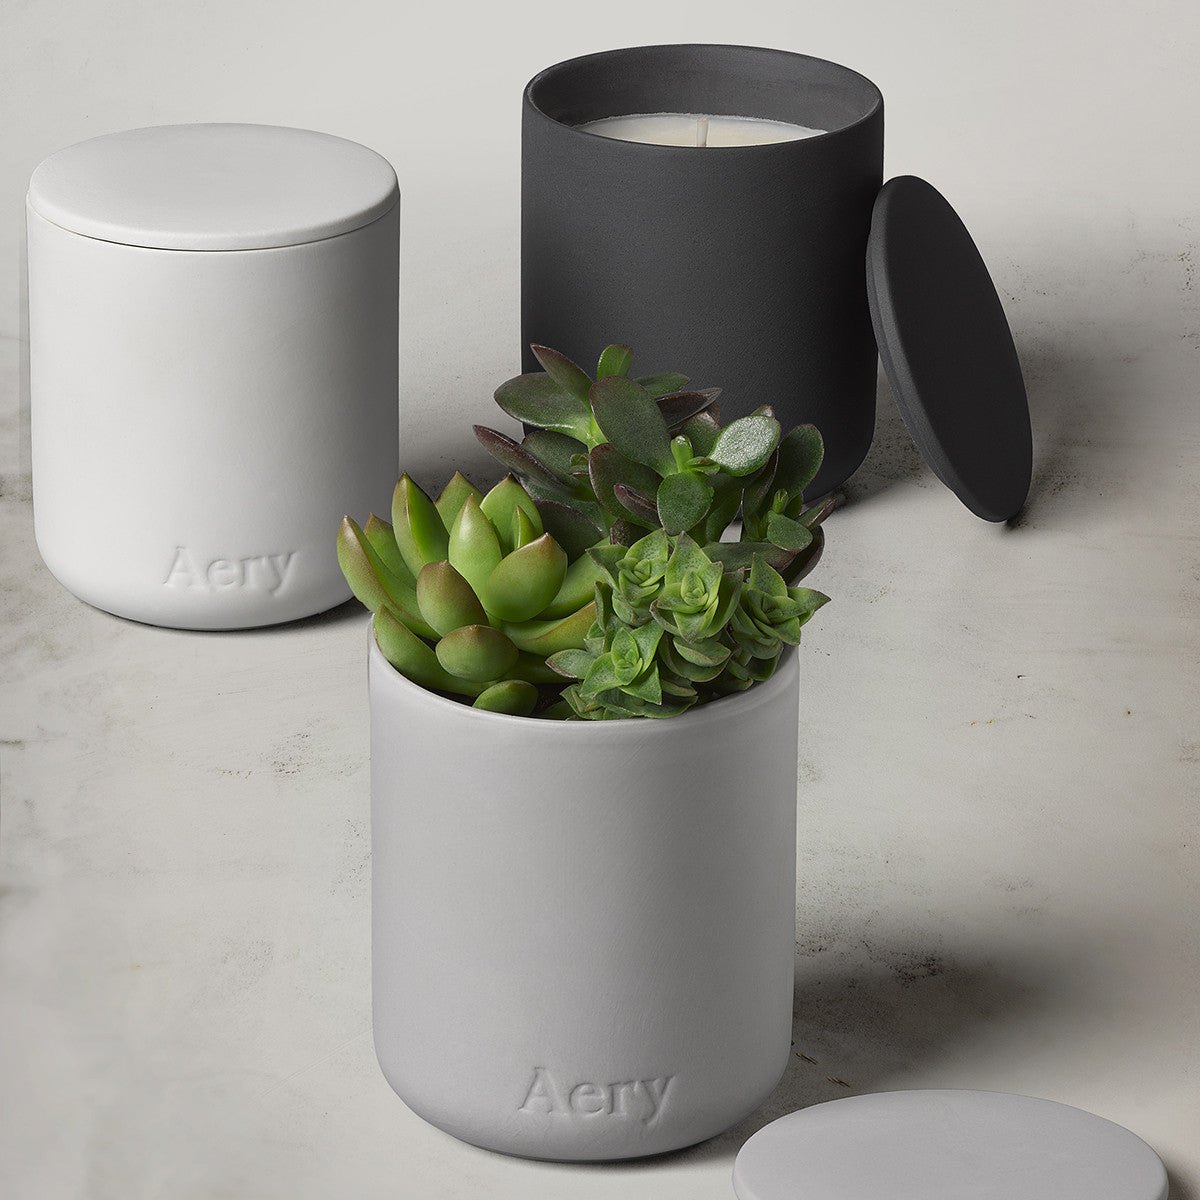 Aery Living Fernweh Matte Ceramic Candle Made of Fridays